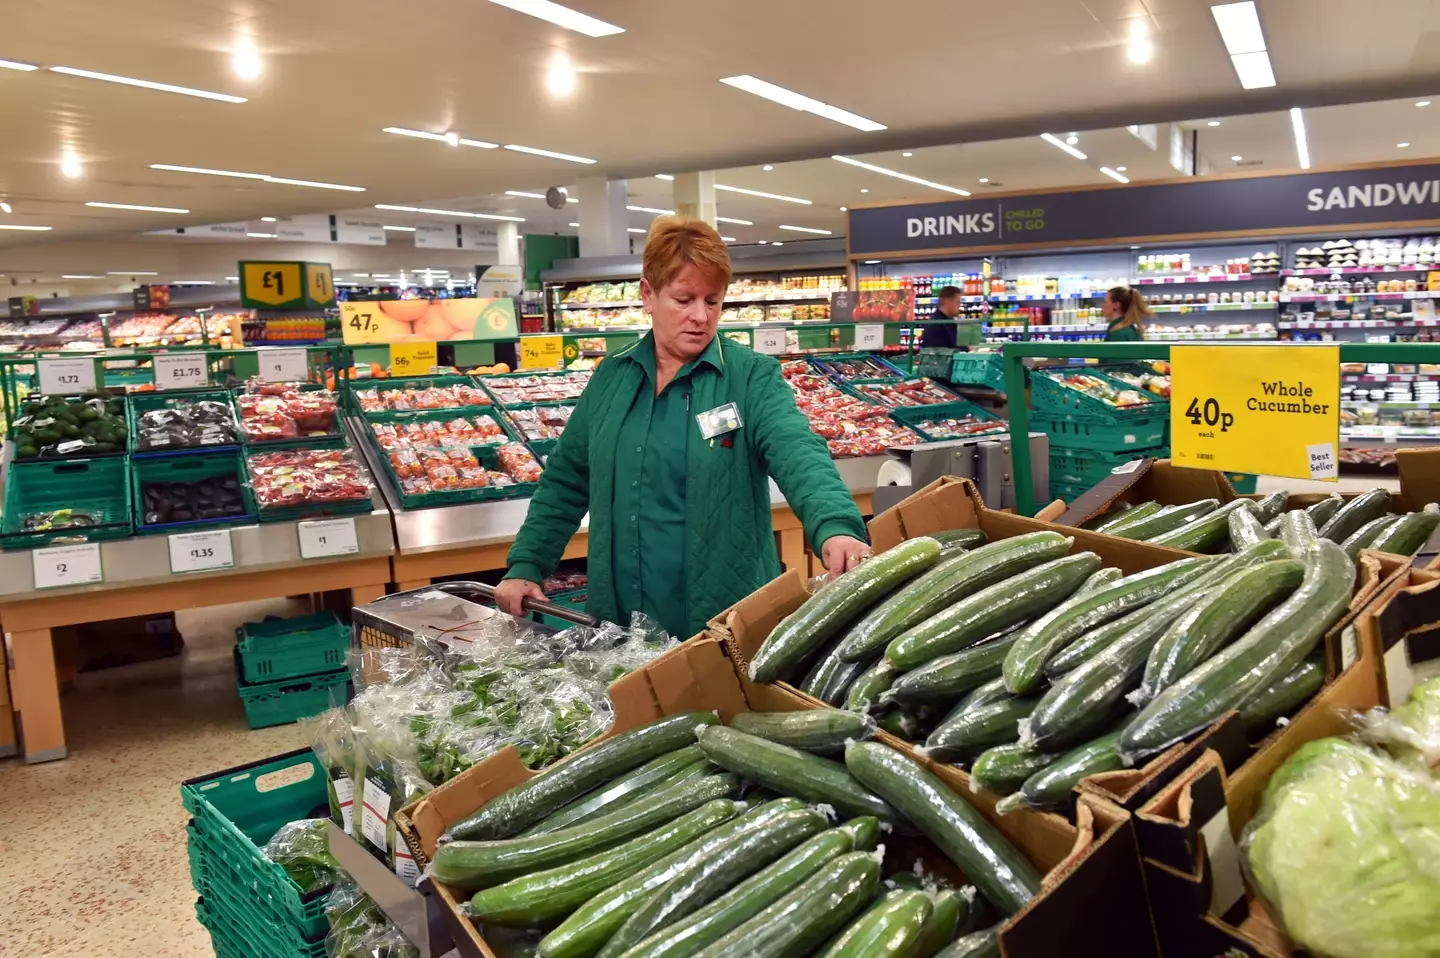 Lidl wasn't having any of the large cucumber purchase.